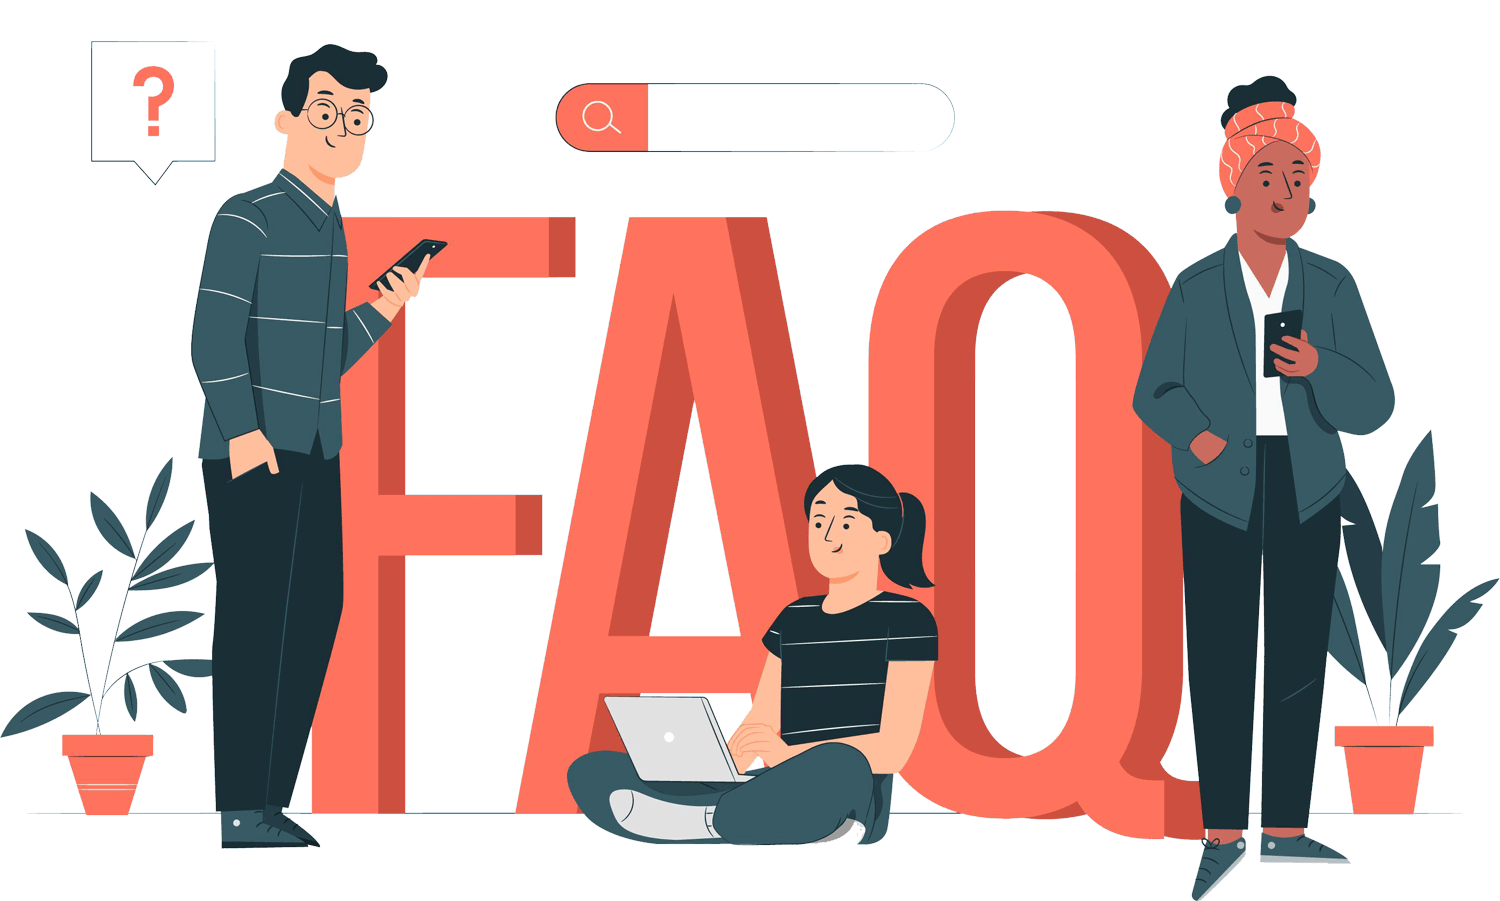 Frequently Asked Questions
                                            about Search Engine Optimization. Image with a group of people thinking
                                            about vital questions concerning this fascinating technology.
                                            Do you have questions about our enterprise seo agency software or processes?
                                            